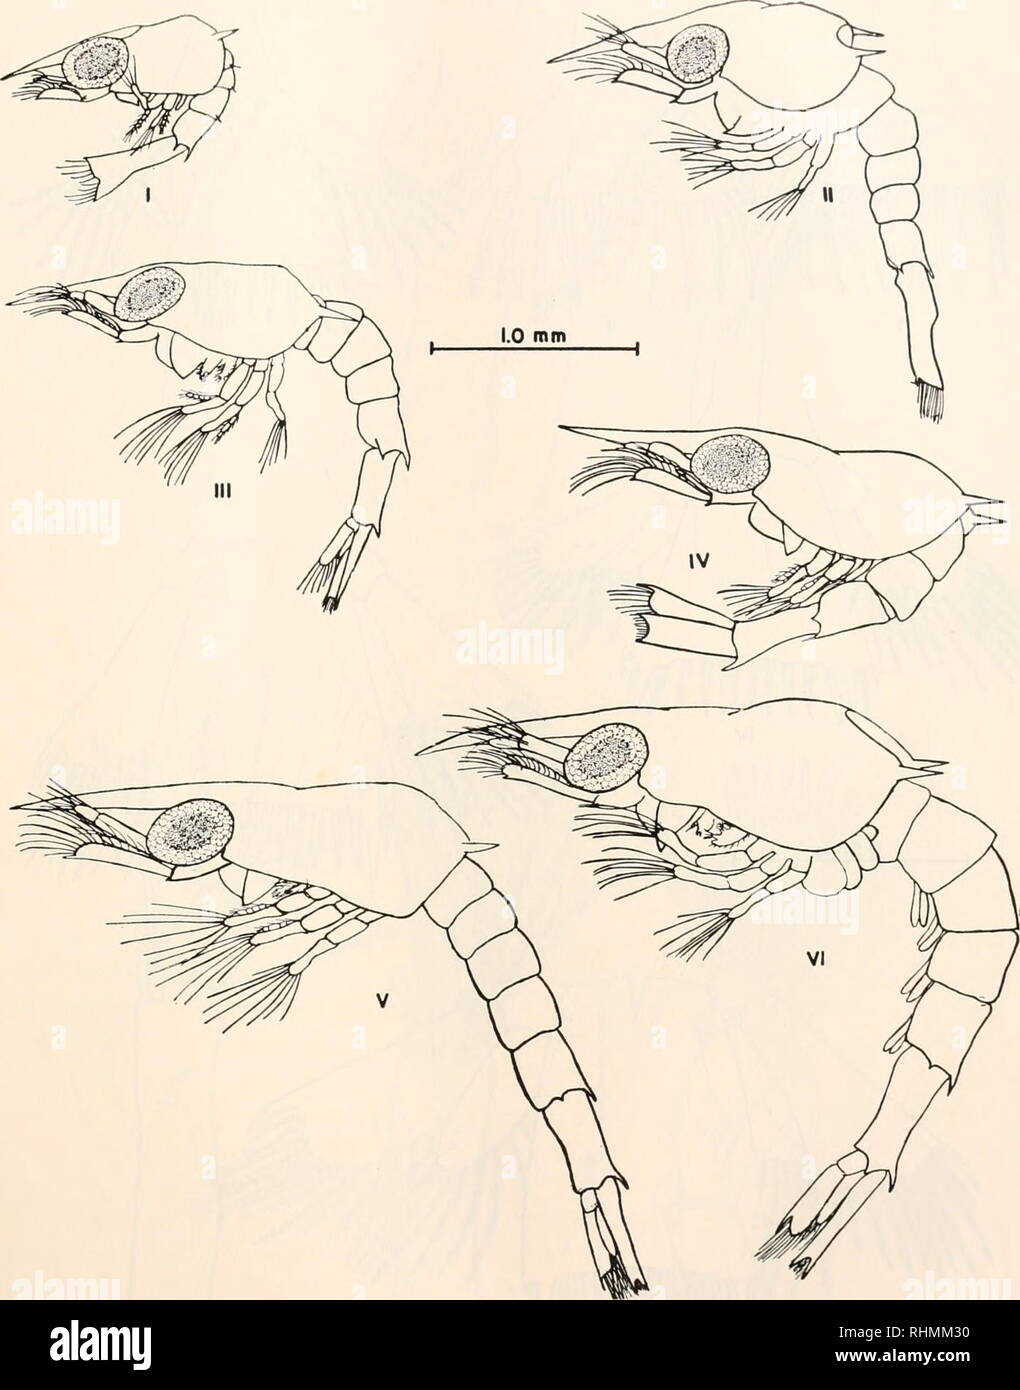 . The Biological bulletin. Biology; Zoology; Biology; Marine Biology. LARVAL DEVELOPMENT OF CALCINUS 183. FIGURE 2. Calciniis tibicen. Zoeal stages I-VI, lateral view. The maxilla (Fig. 7, I) bears six or seven setae on the proximal lobe of the coxal endite, four on the distal lobe. There are four setae on both proximal and distal lobes on the basal endite. The bilobed unsegmented endopodite bears four setae, the scaphognathite five plumose setae. The first maxilliped (Fig. 8, I) has a prominent curved seta upon a papilla. Please note that these images are extracted from scanned page images th Stock Photo